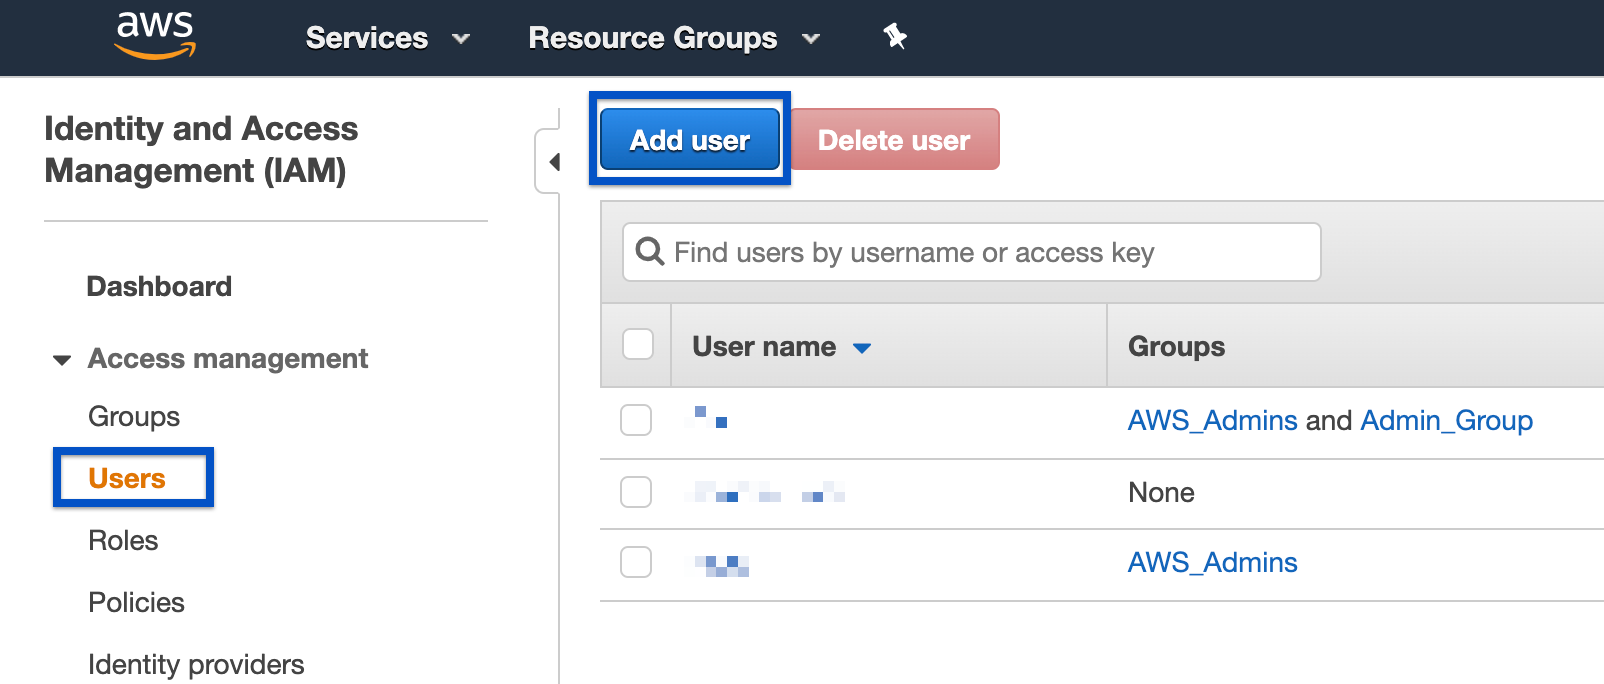 Add a new user to your Athena database